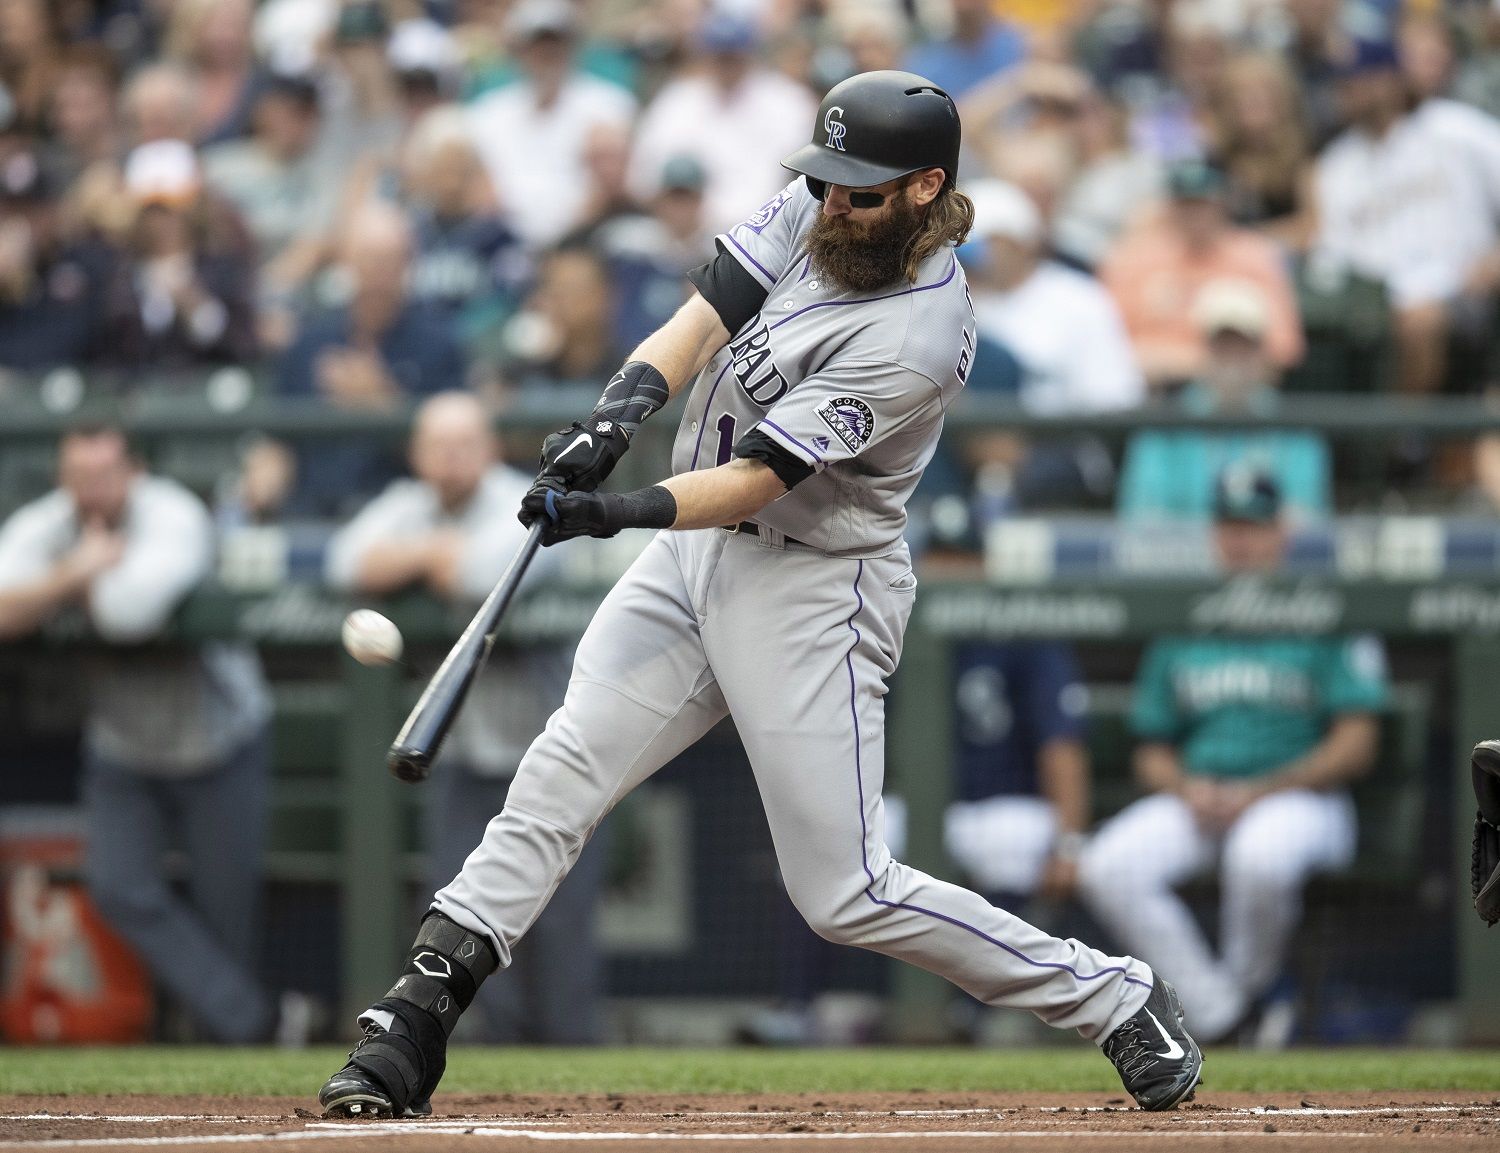 Colorado Rockies' Charlie Blackmon hits a solo home run off Seattle Mariners starting pitcher Felix Hernandez during the first inning of a baseball game, Friday, July 6, 2018, in Seattle. (AP Photo/Stephen Brashear)